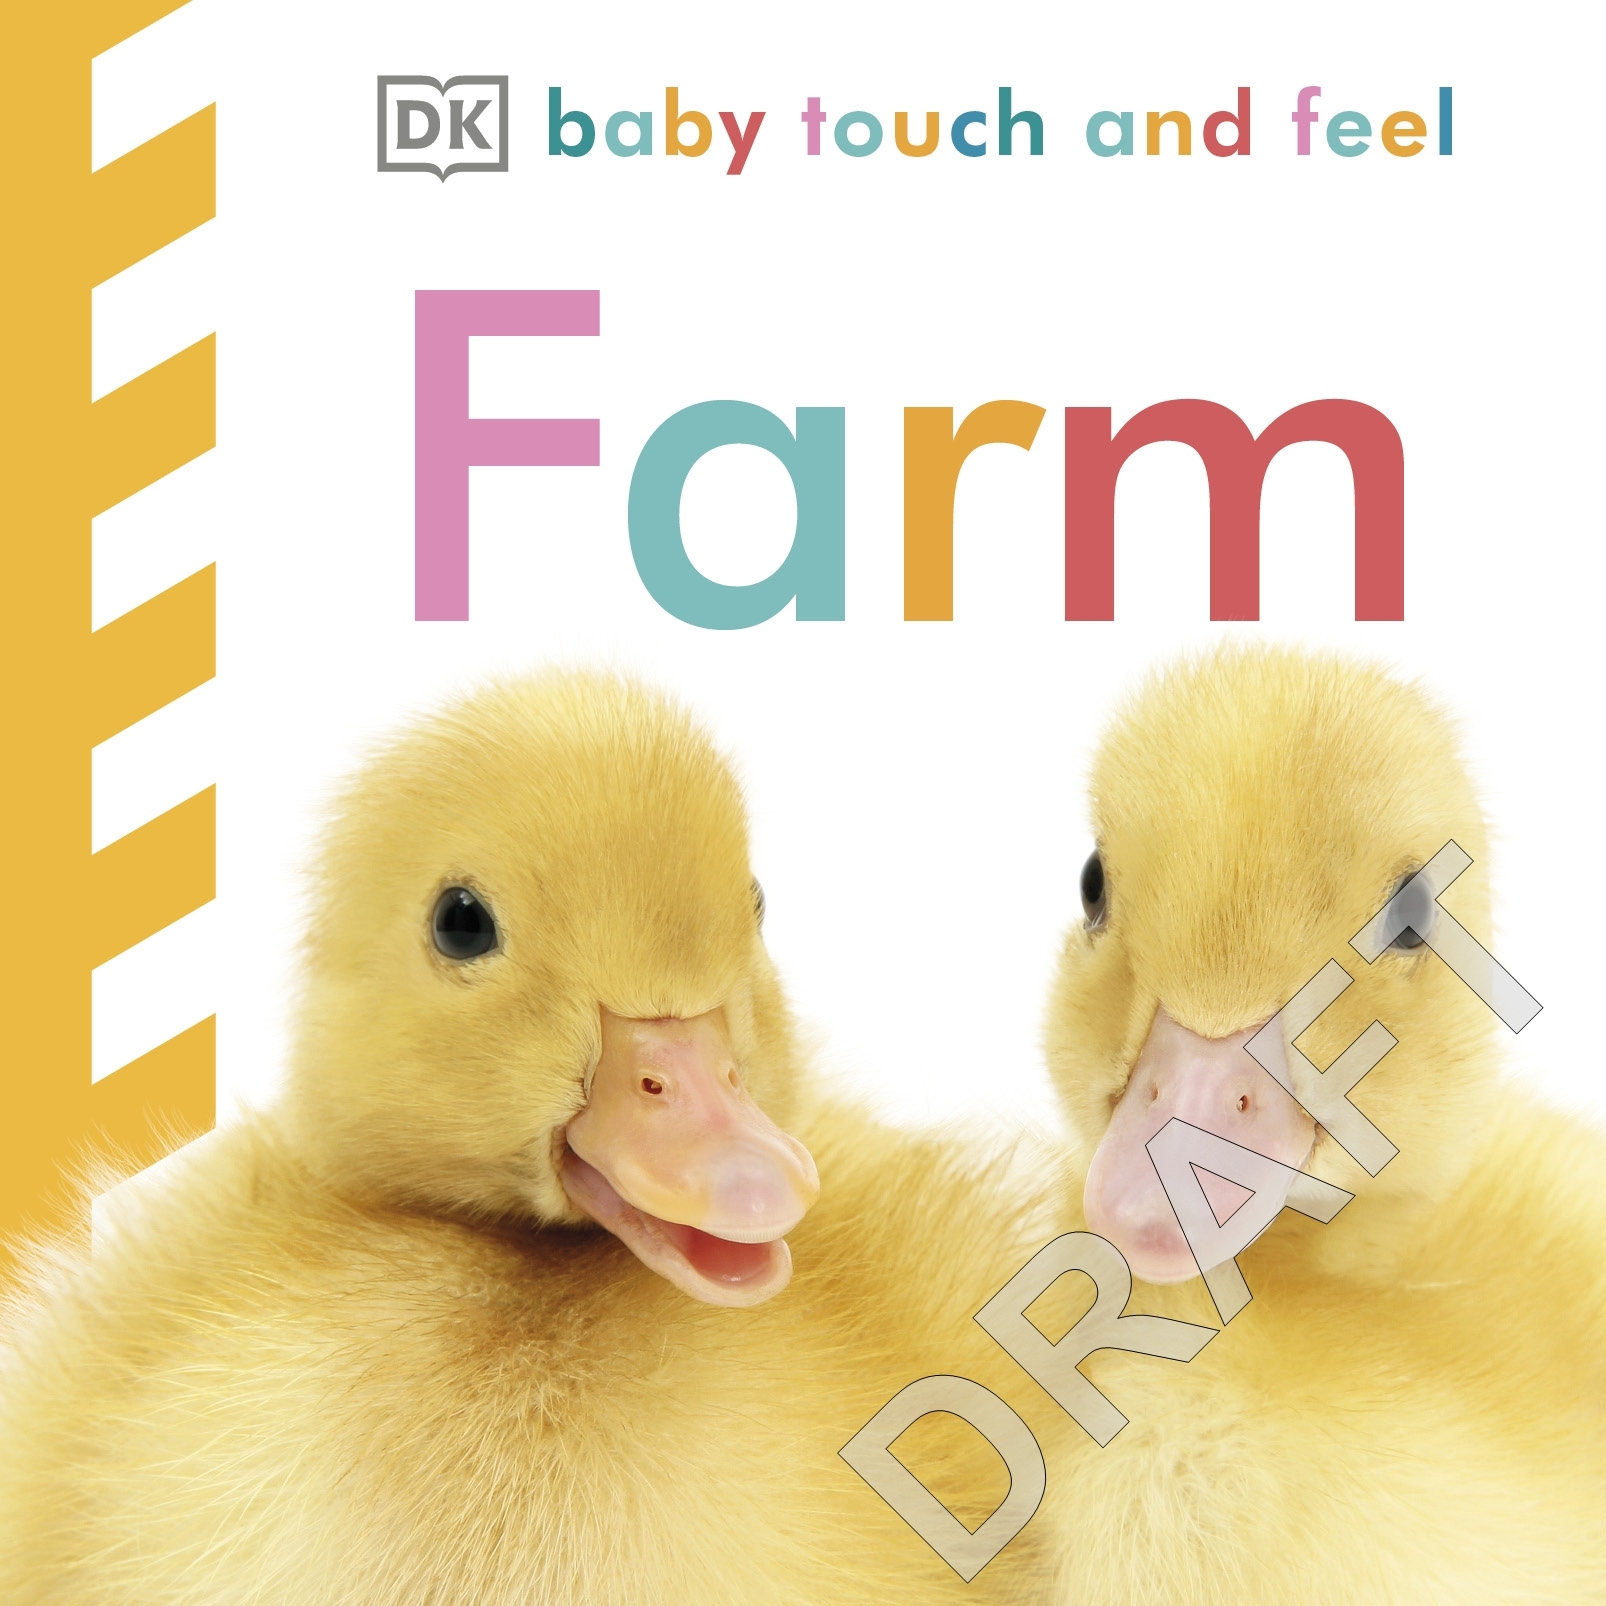 Baby's First Words by DK - Penguin Books New Zealand